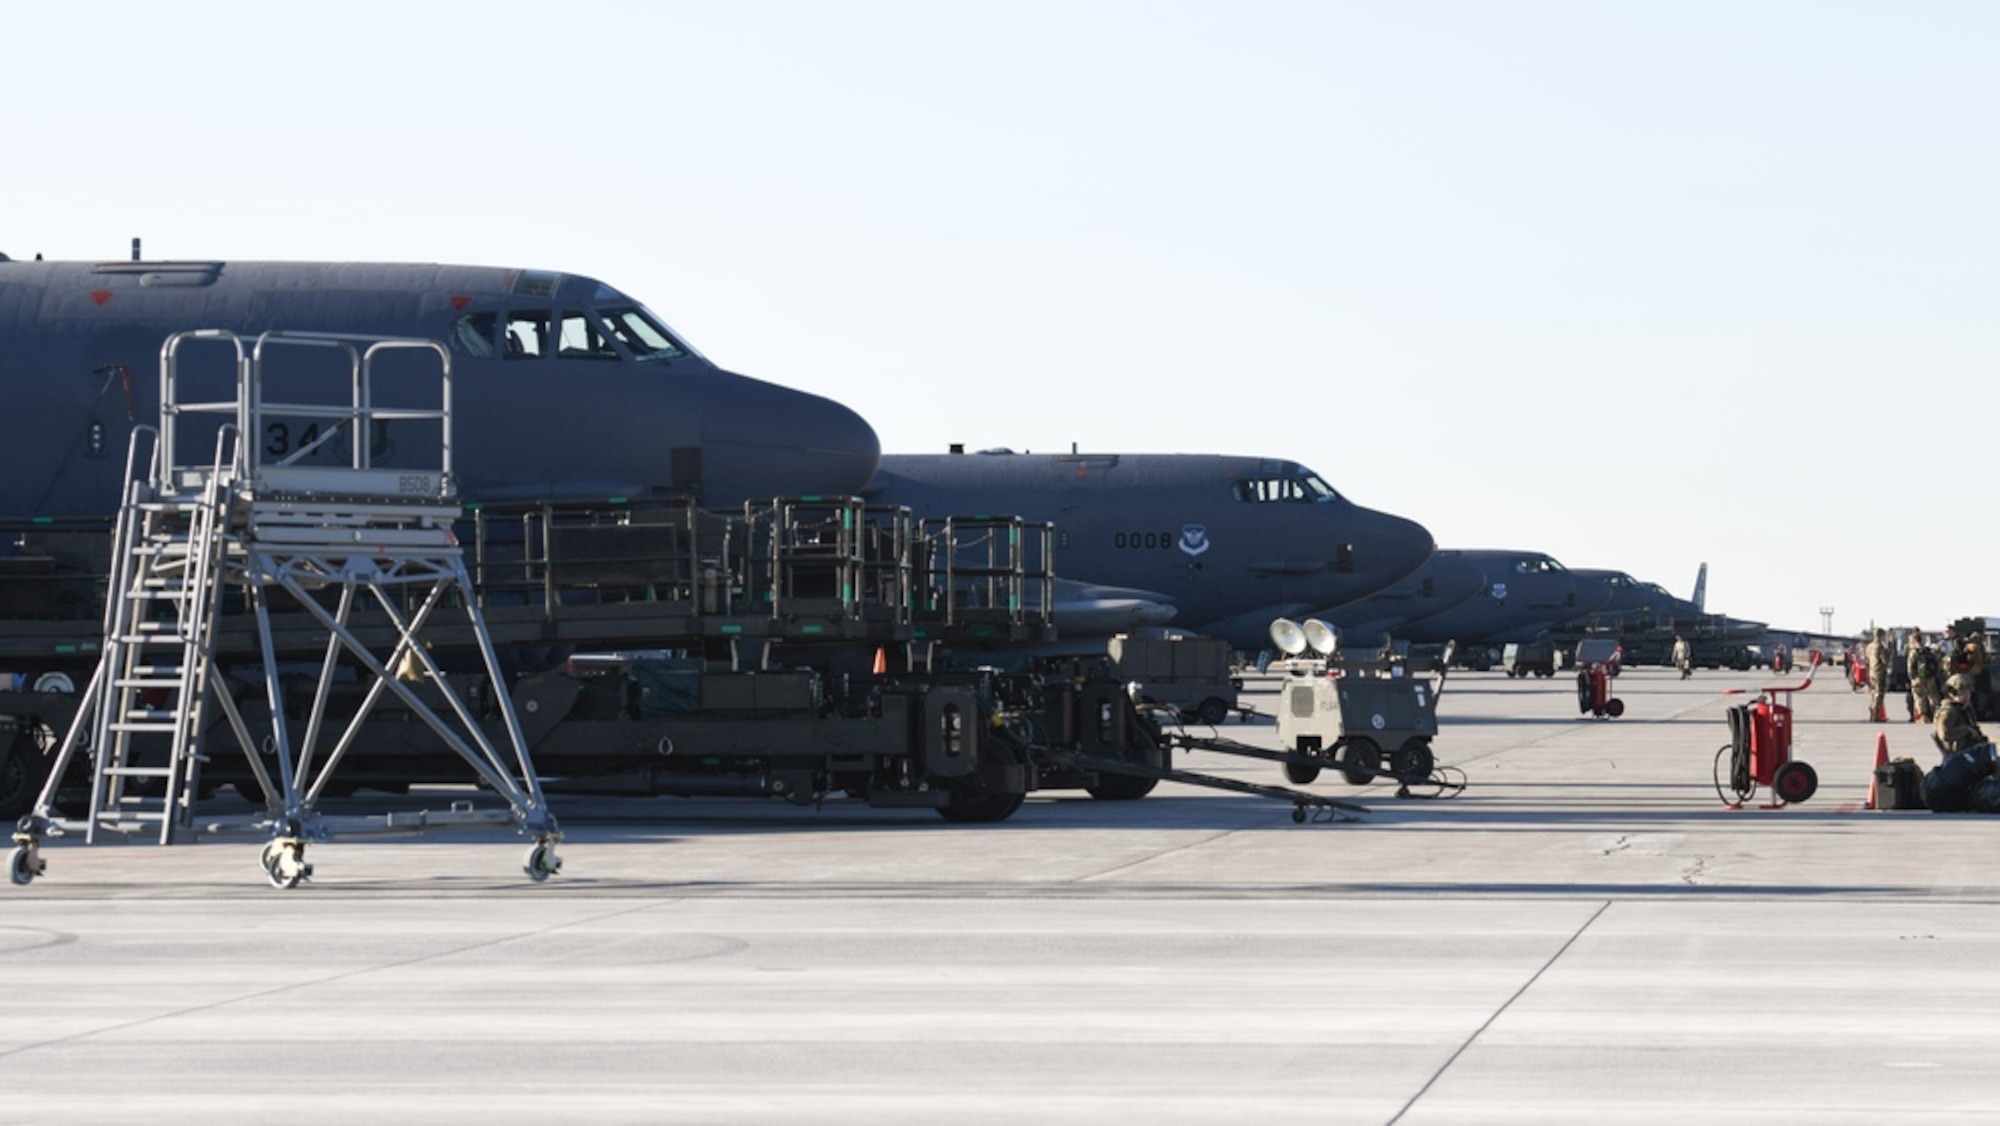 Every year U.S. Strategic Command holds a nuclear-command and control exercise, Global Thunder, which tests and validates the nuclear operation process, exercises like these demonstrate the readiness of the nation’s nuclear capabilities. Global Thunder 22 tested Team Minot’s 5th Bomb Wing and 91st Missile Wing.